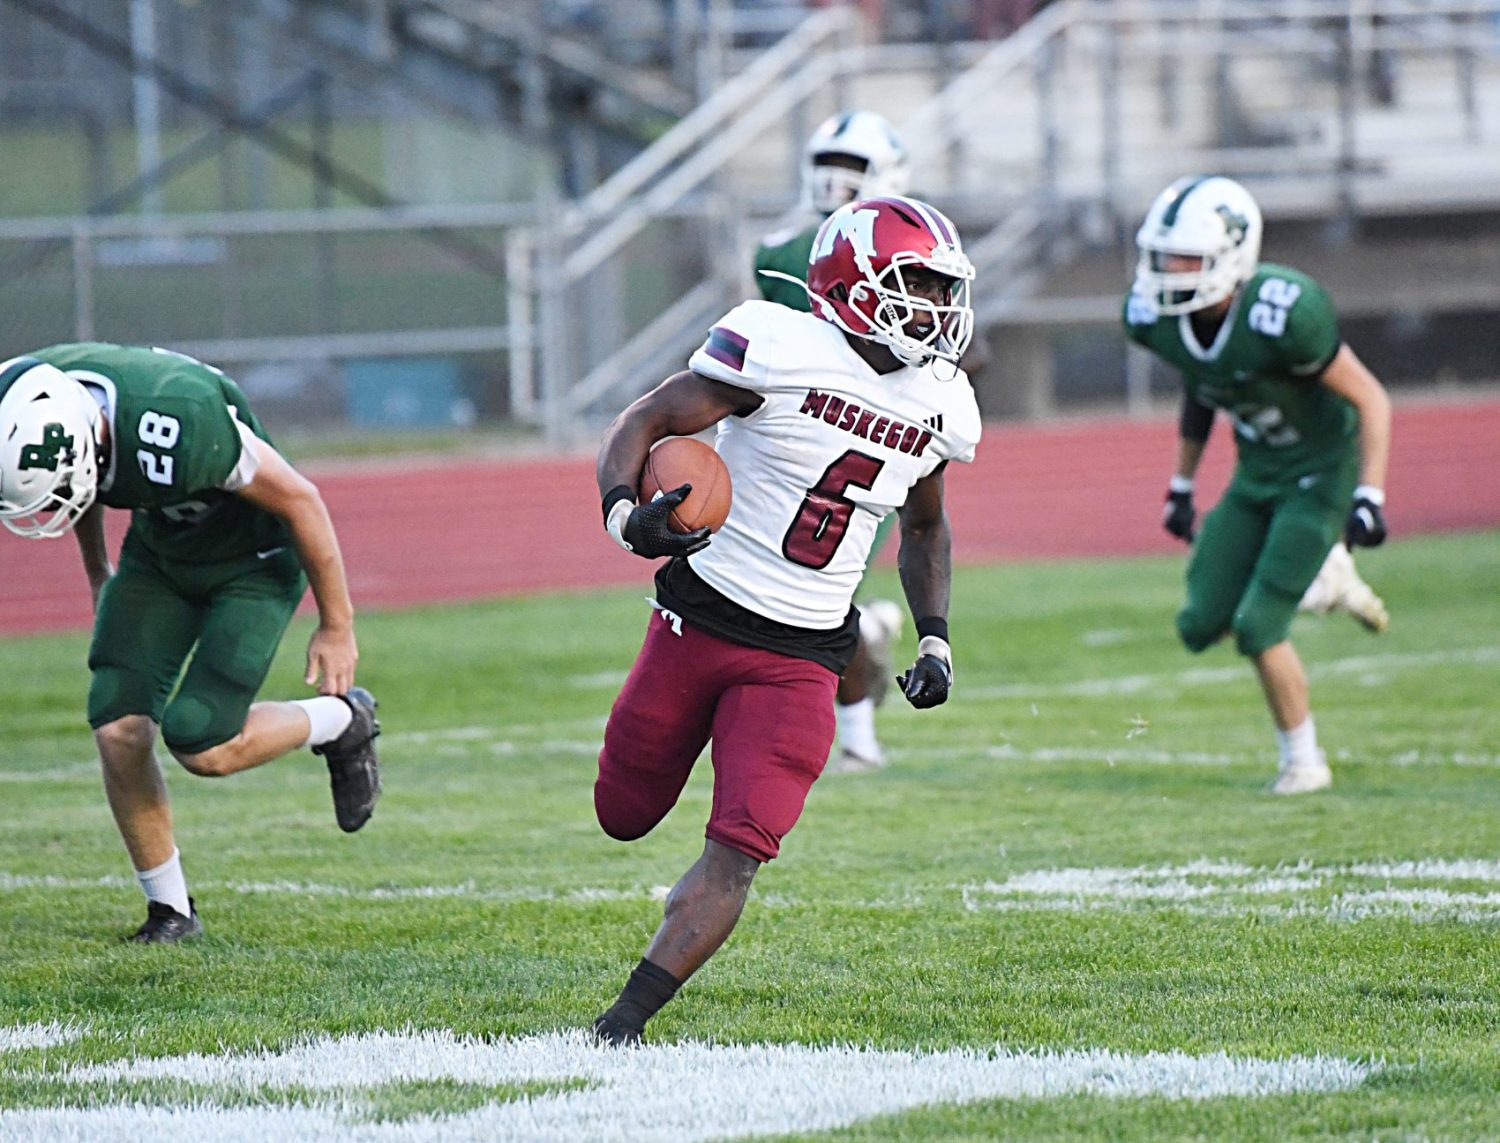 Improving Muskegon Big Reds take down cross-town rival Reeths-Puffer, 28-13